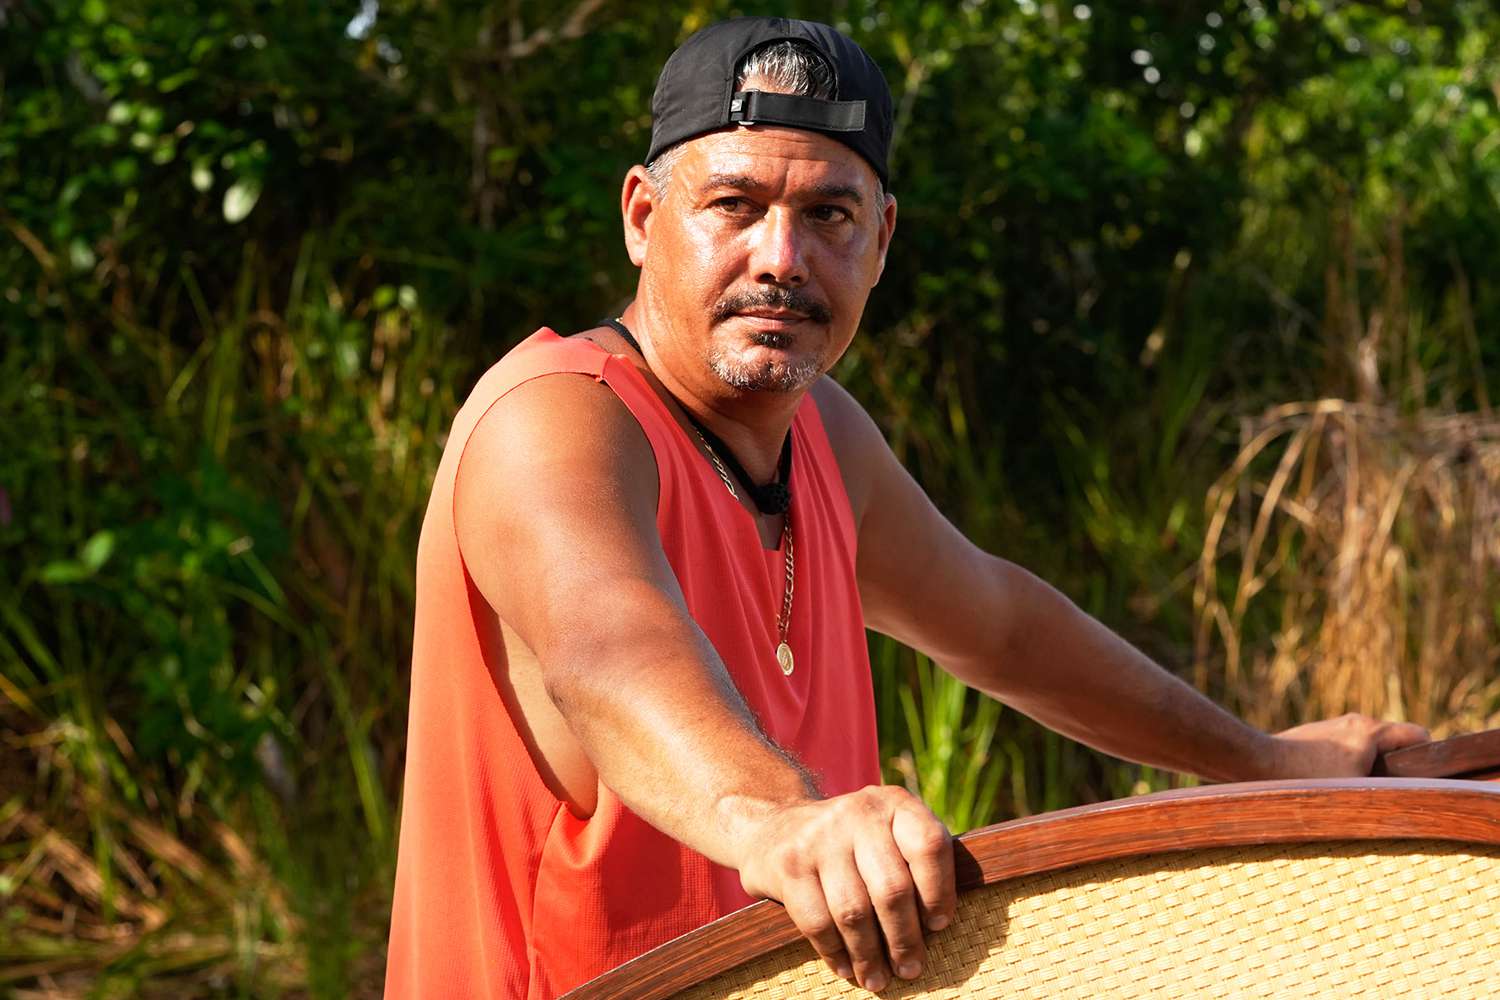 Boston Rob Mariano Kept His 'Brutal' “Deal or No Deal Island ”Fate from Wife Amber: 'It Spoils the Fun' (Exclusive)